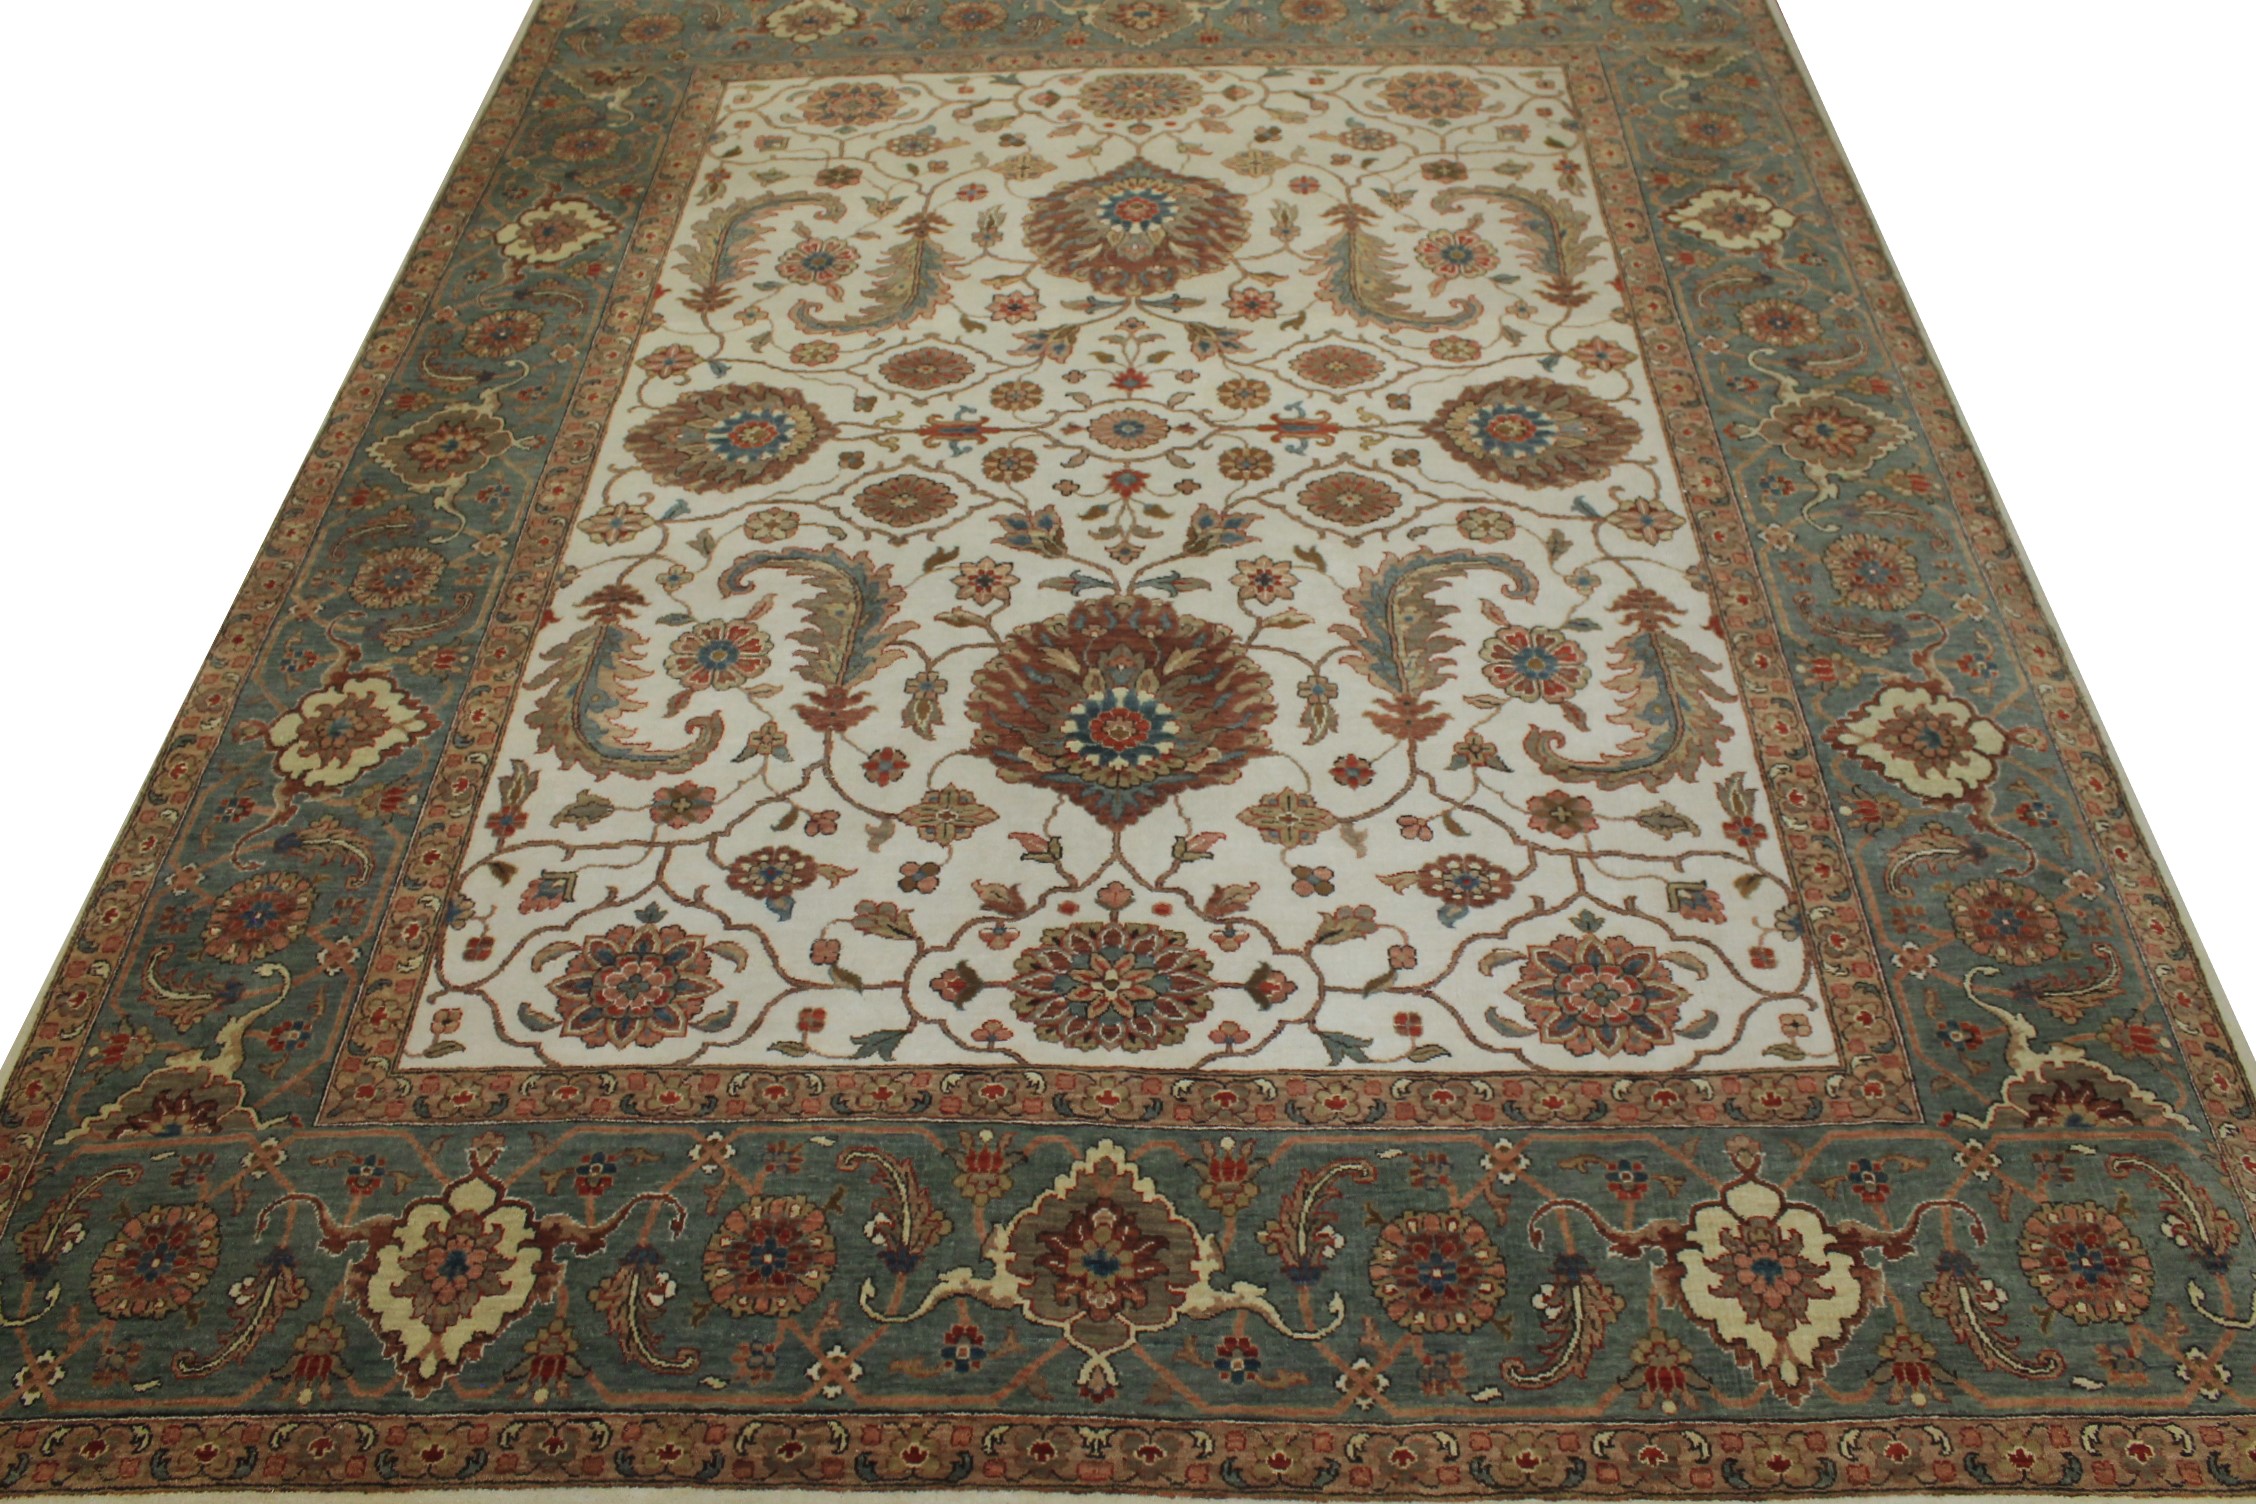 8x10 Antique Revival Hand Knotted Wool Area Rug - MR19910